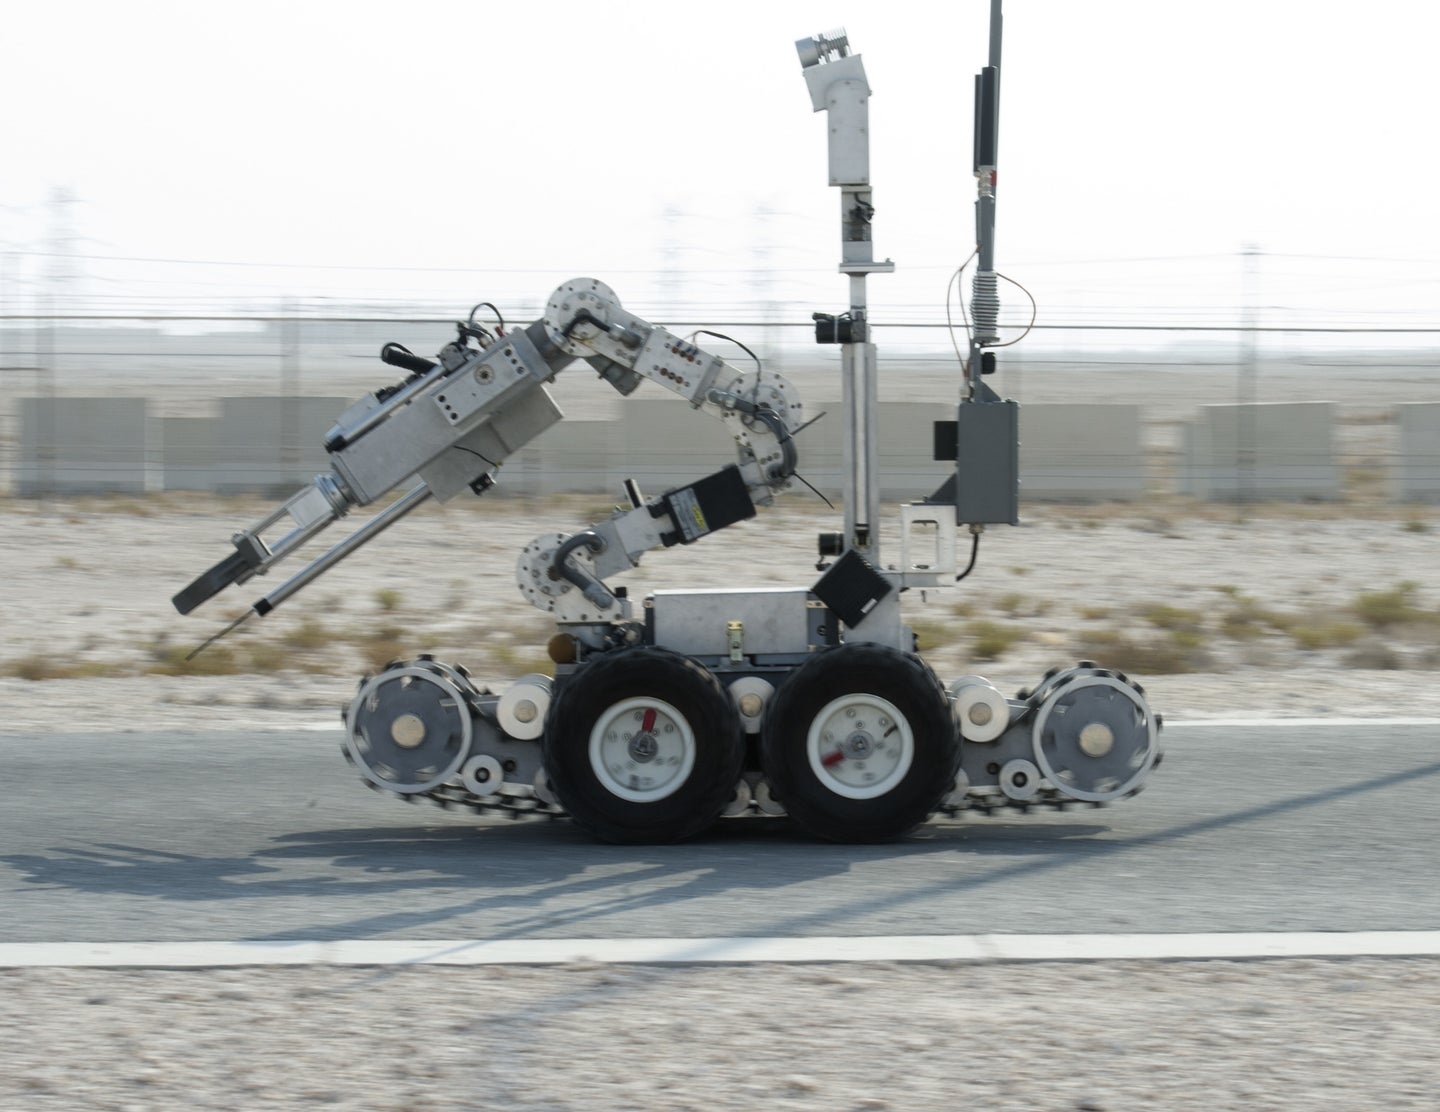 A robot used for explosive ordnance disposal is seen in Qatar in 2017.